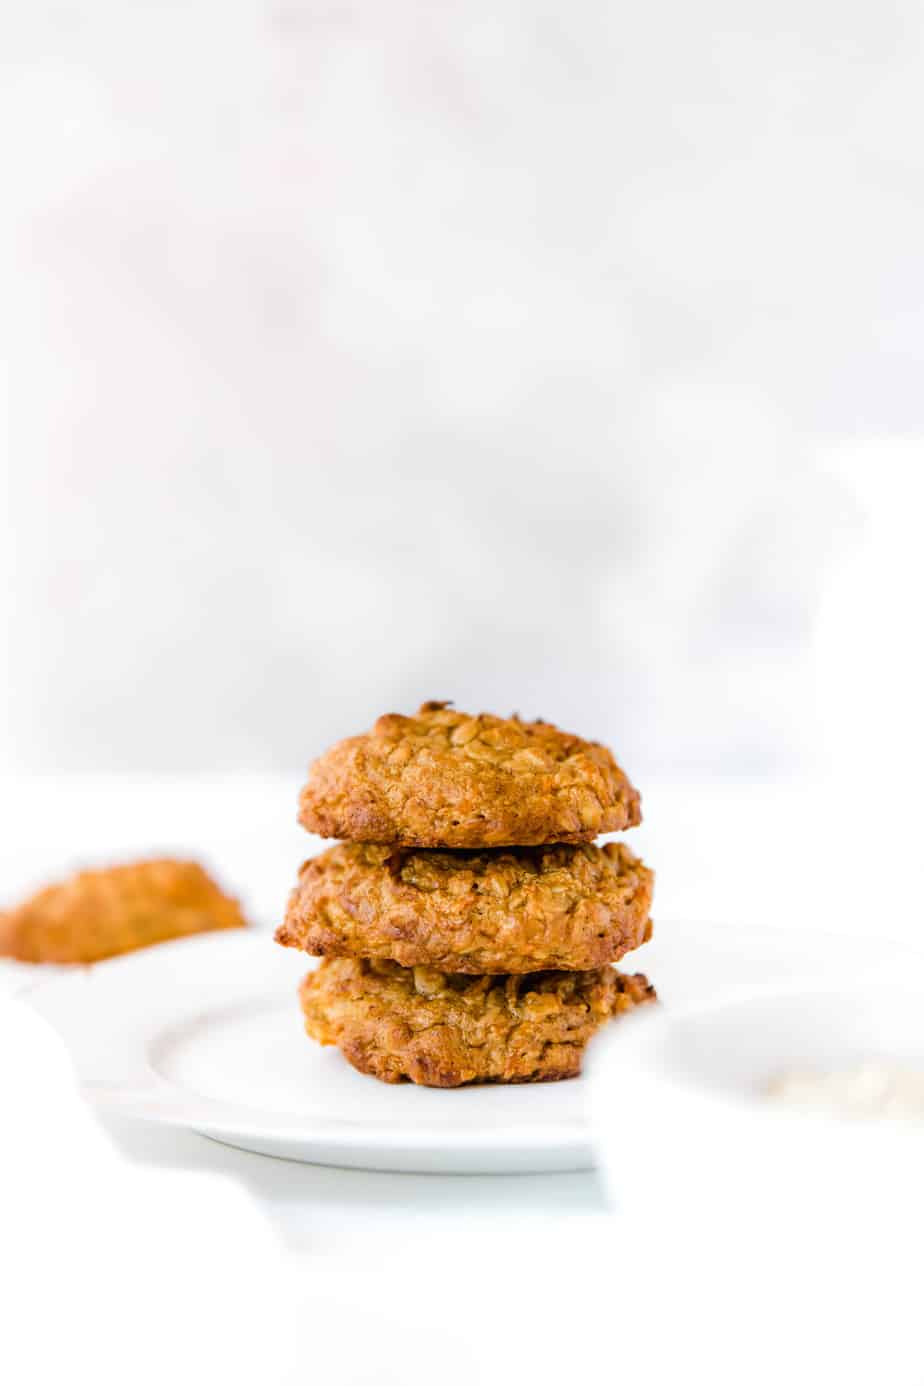 Healthy Cinnamon Carrot Cookies - Gluten-free, vegan cookies that are moist, delicious and easy to make.